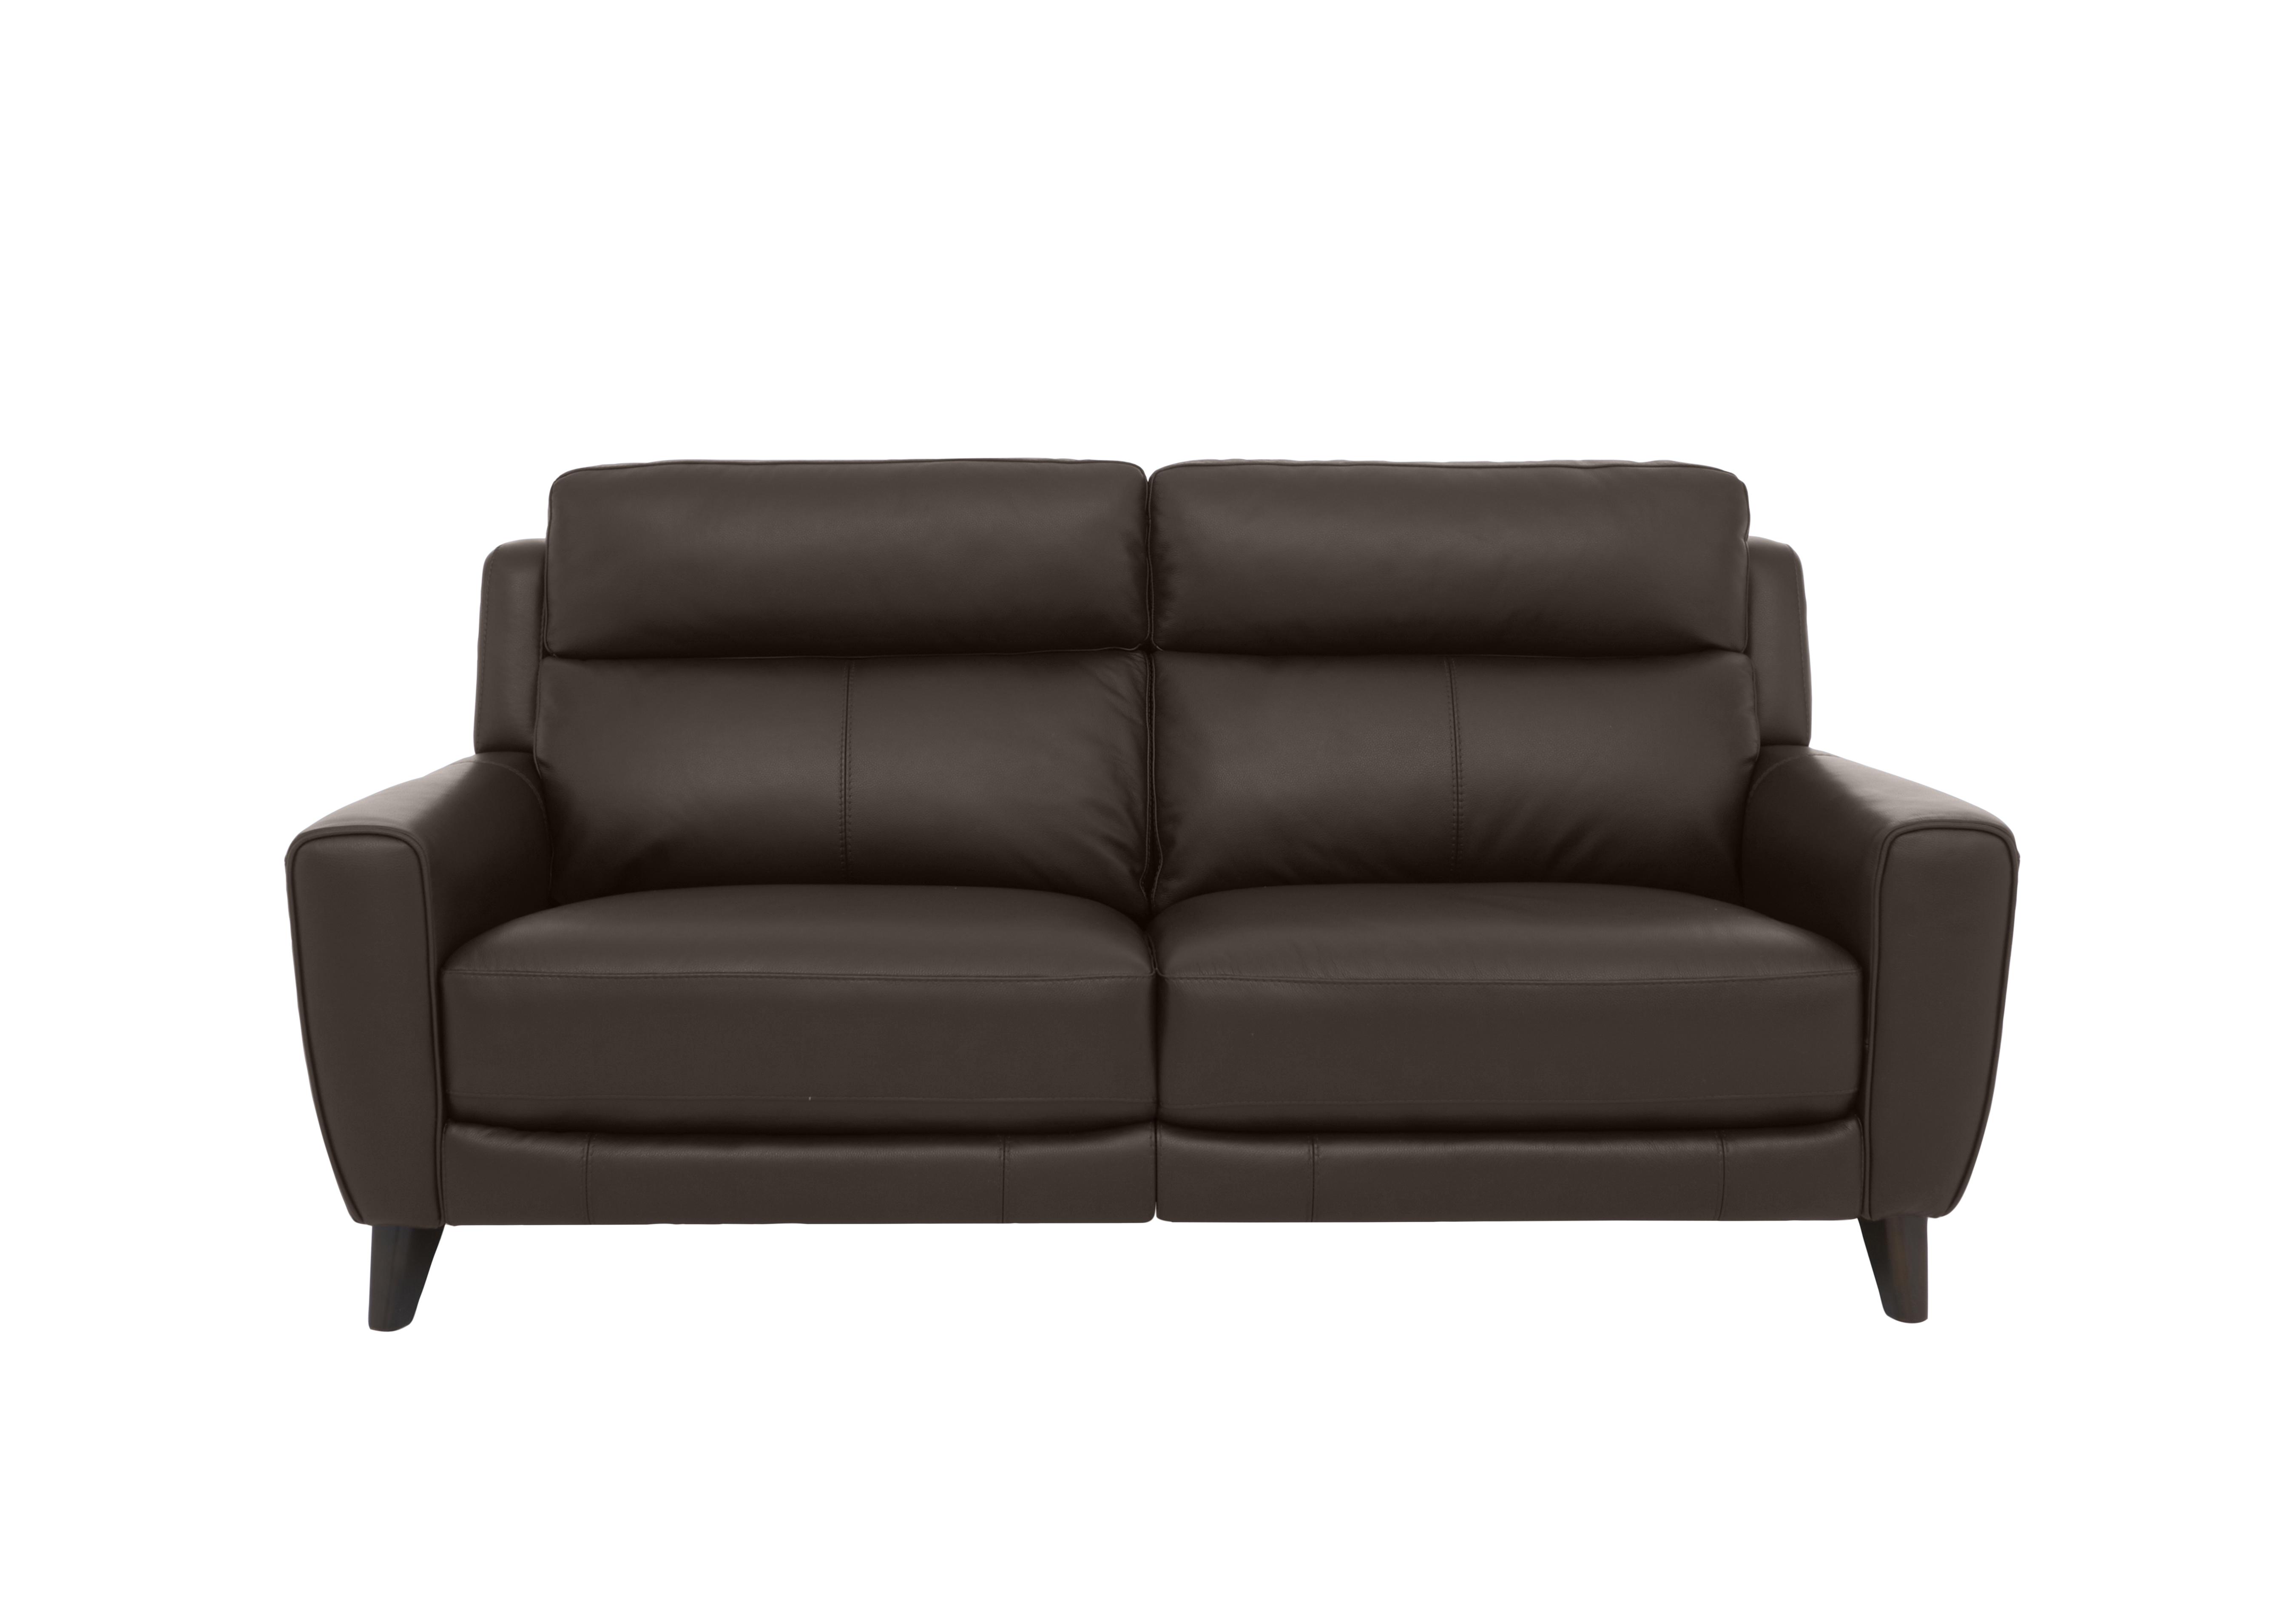 Zen 3 Seater Leather Power Recliner Sofa with Power Headrests in Bx-037c Walnut on Furniture Village